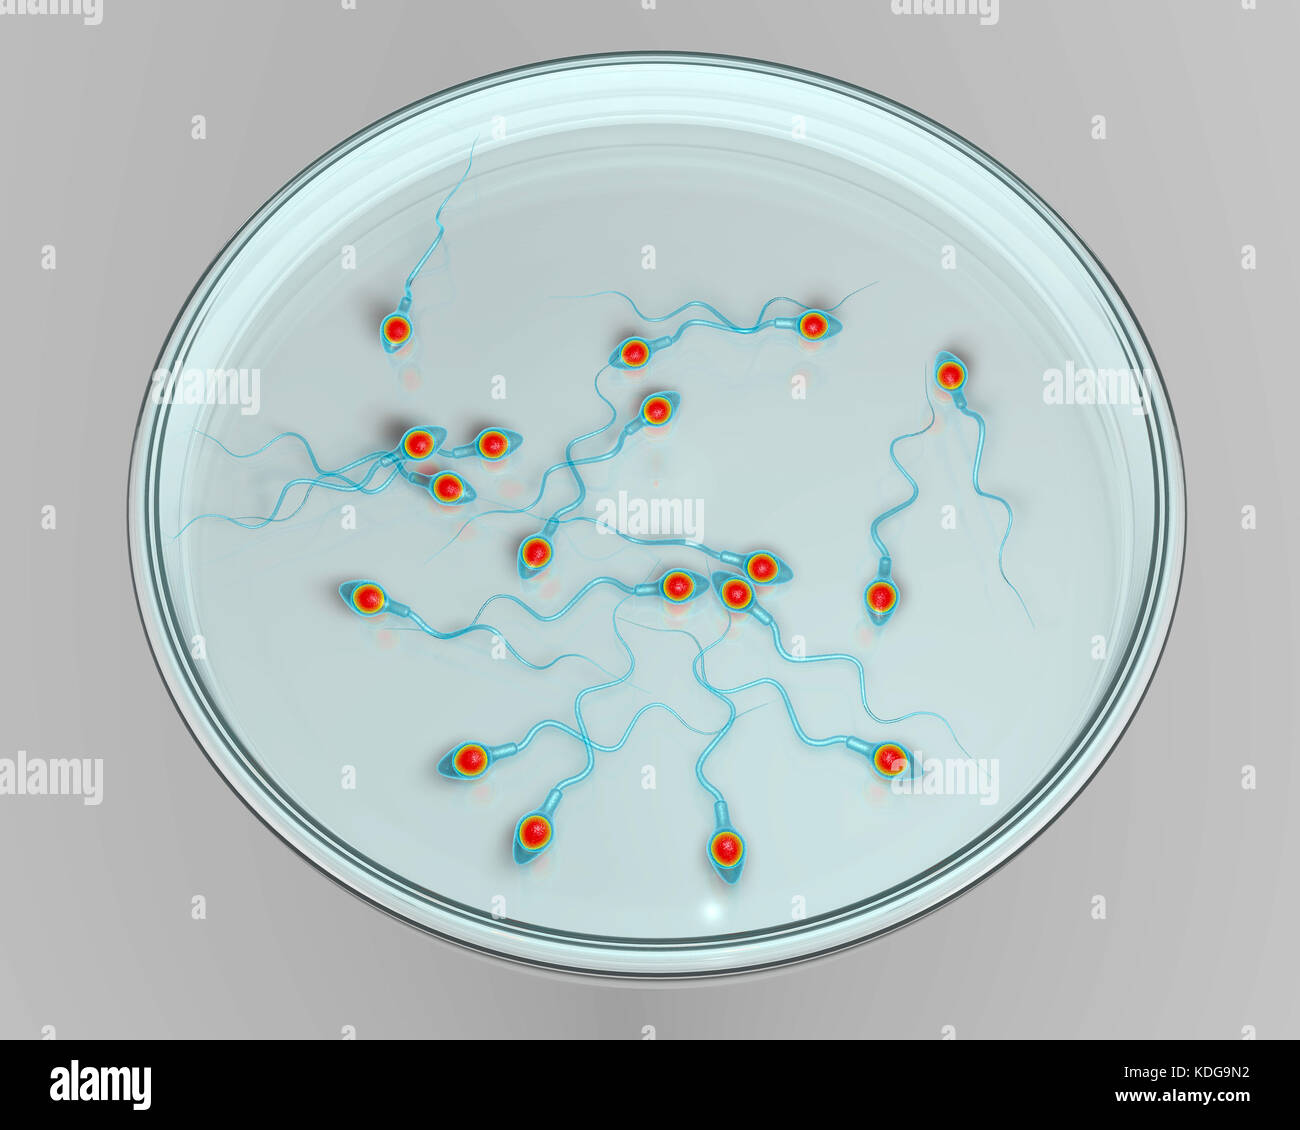 In vitro fertilization concept. Computer illustration showing spermatozoans in a petri dish waiting to be used to fertilize an egg cell. Stock Photo